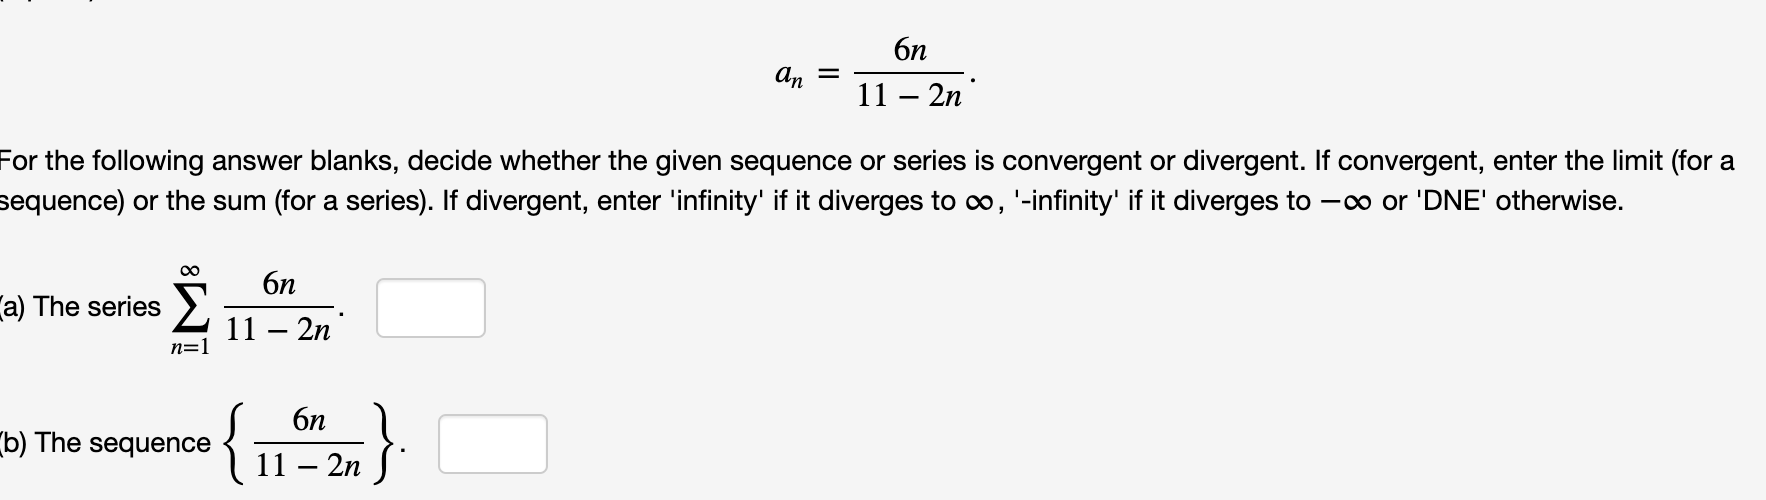 бп
11 – 2n
For the following answer blanks, decide whether the given sequence or series is convergent or divergent. If convergent, enter the limit (for a
sequence) or the sum (for a series). If divergent, enter 'infinity' if it diverges to o, '-infinity' if it diverges to -co or 'DNE' otherwise.
бп
a) The series >
11 – 2n
n=1
{1%}
6n
b) The sequence
11 – 2n
